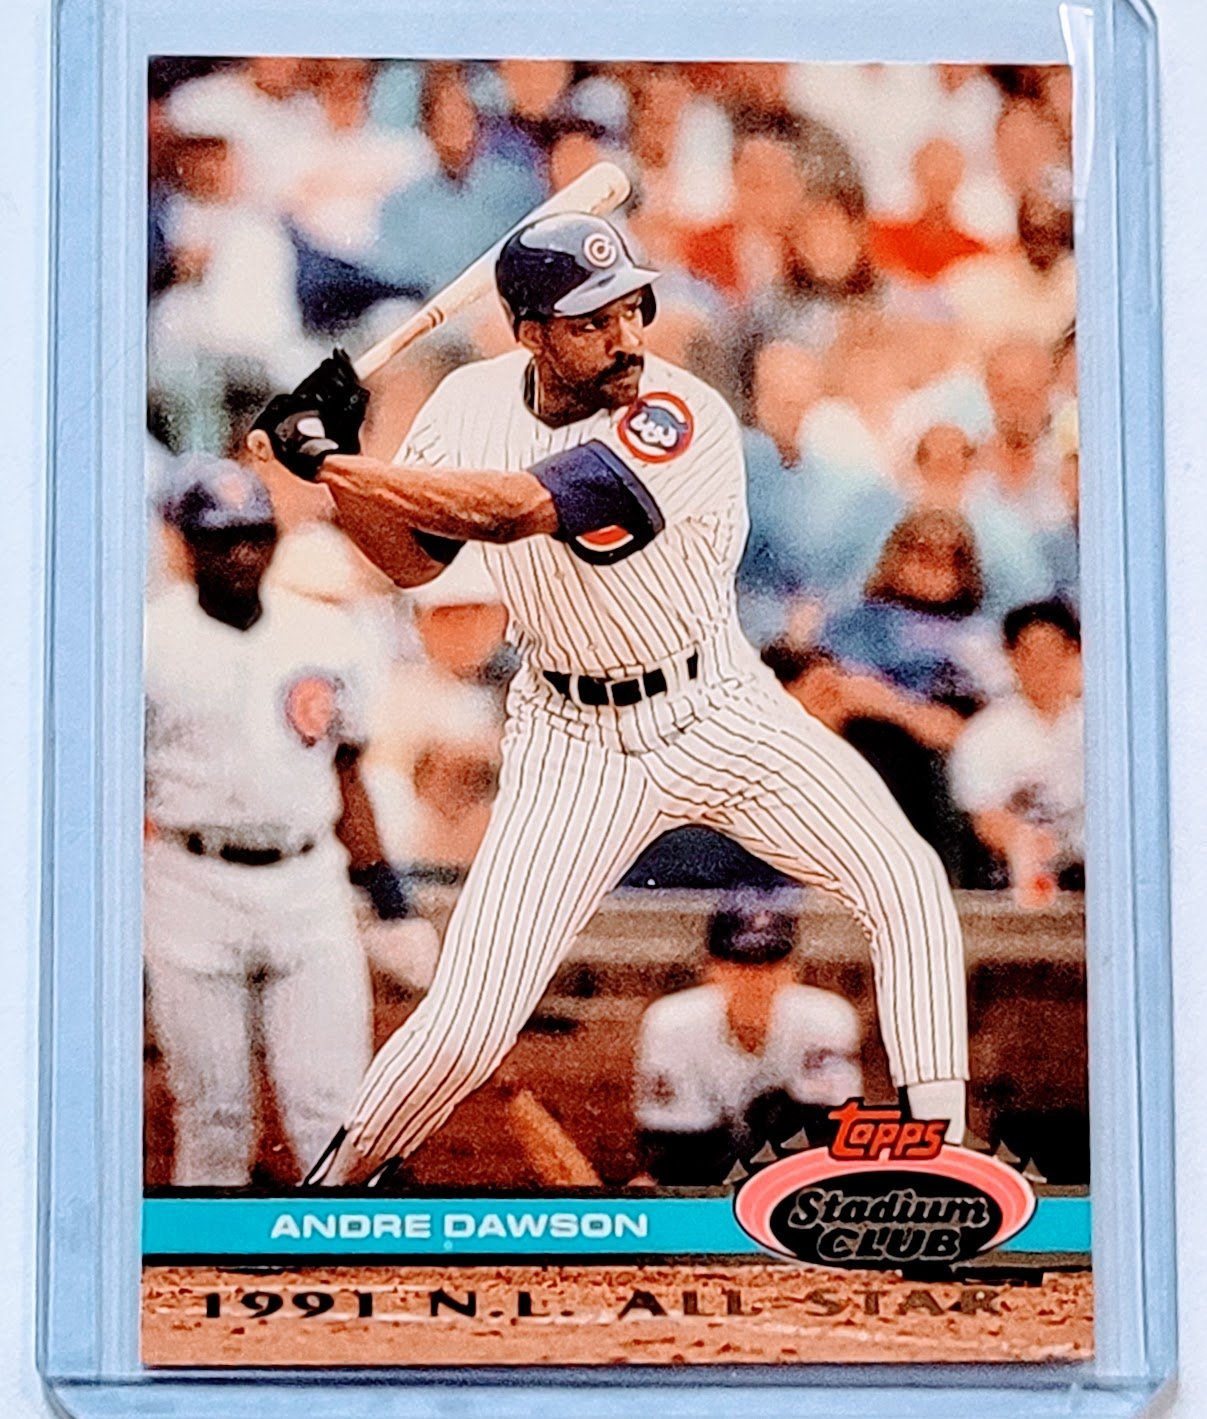 1992 Topps Stadium Club Dome Andre Dawson 1991 All Star MLB Baseball Trading Card TPTV simple Xclusive Collectibles   